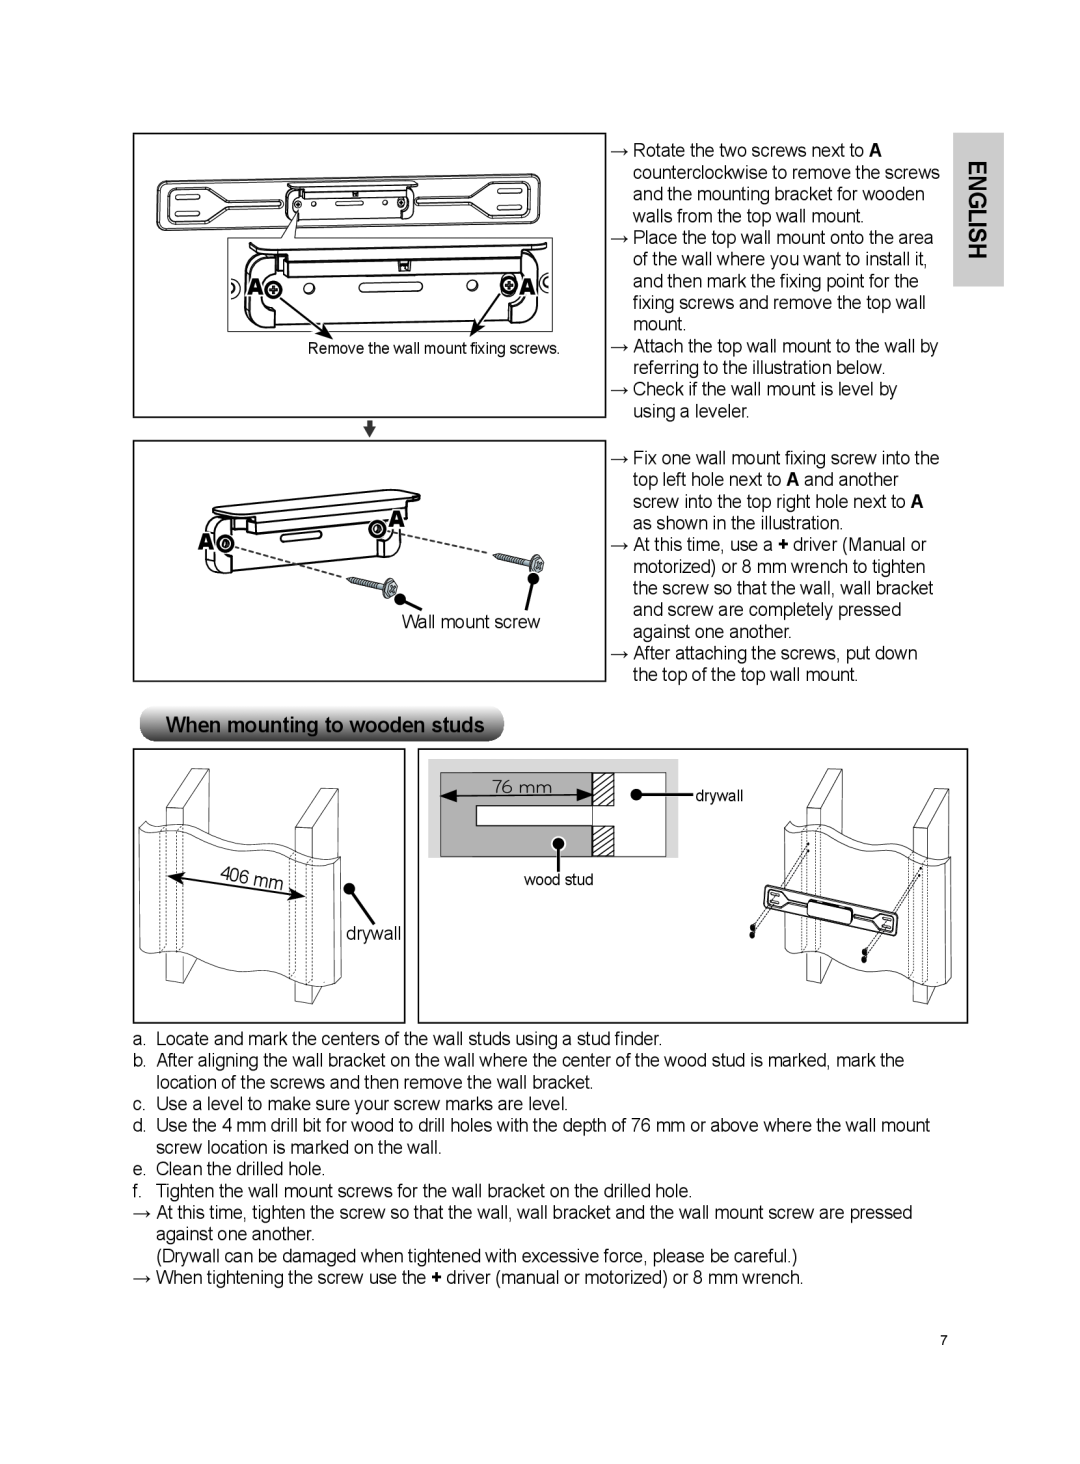 LG Electronics OSW100 When mounting to wooden studs, English, →→Check if the wall mount is level by using a leveler 